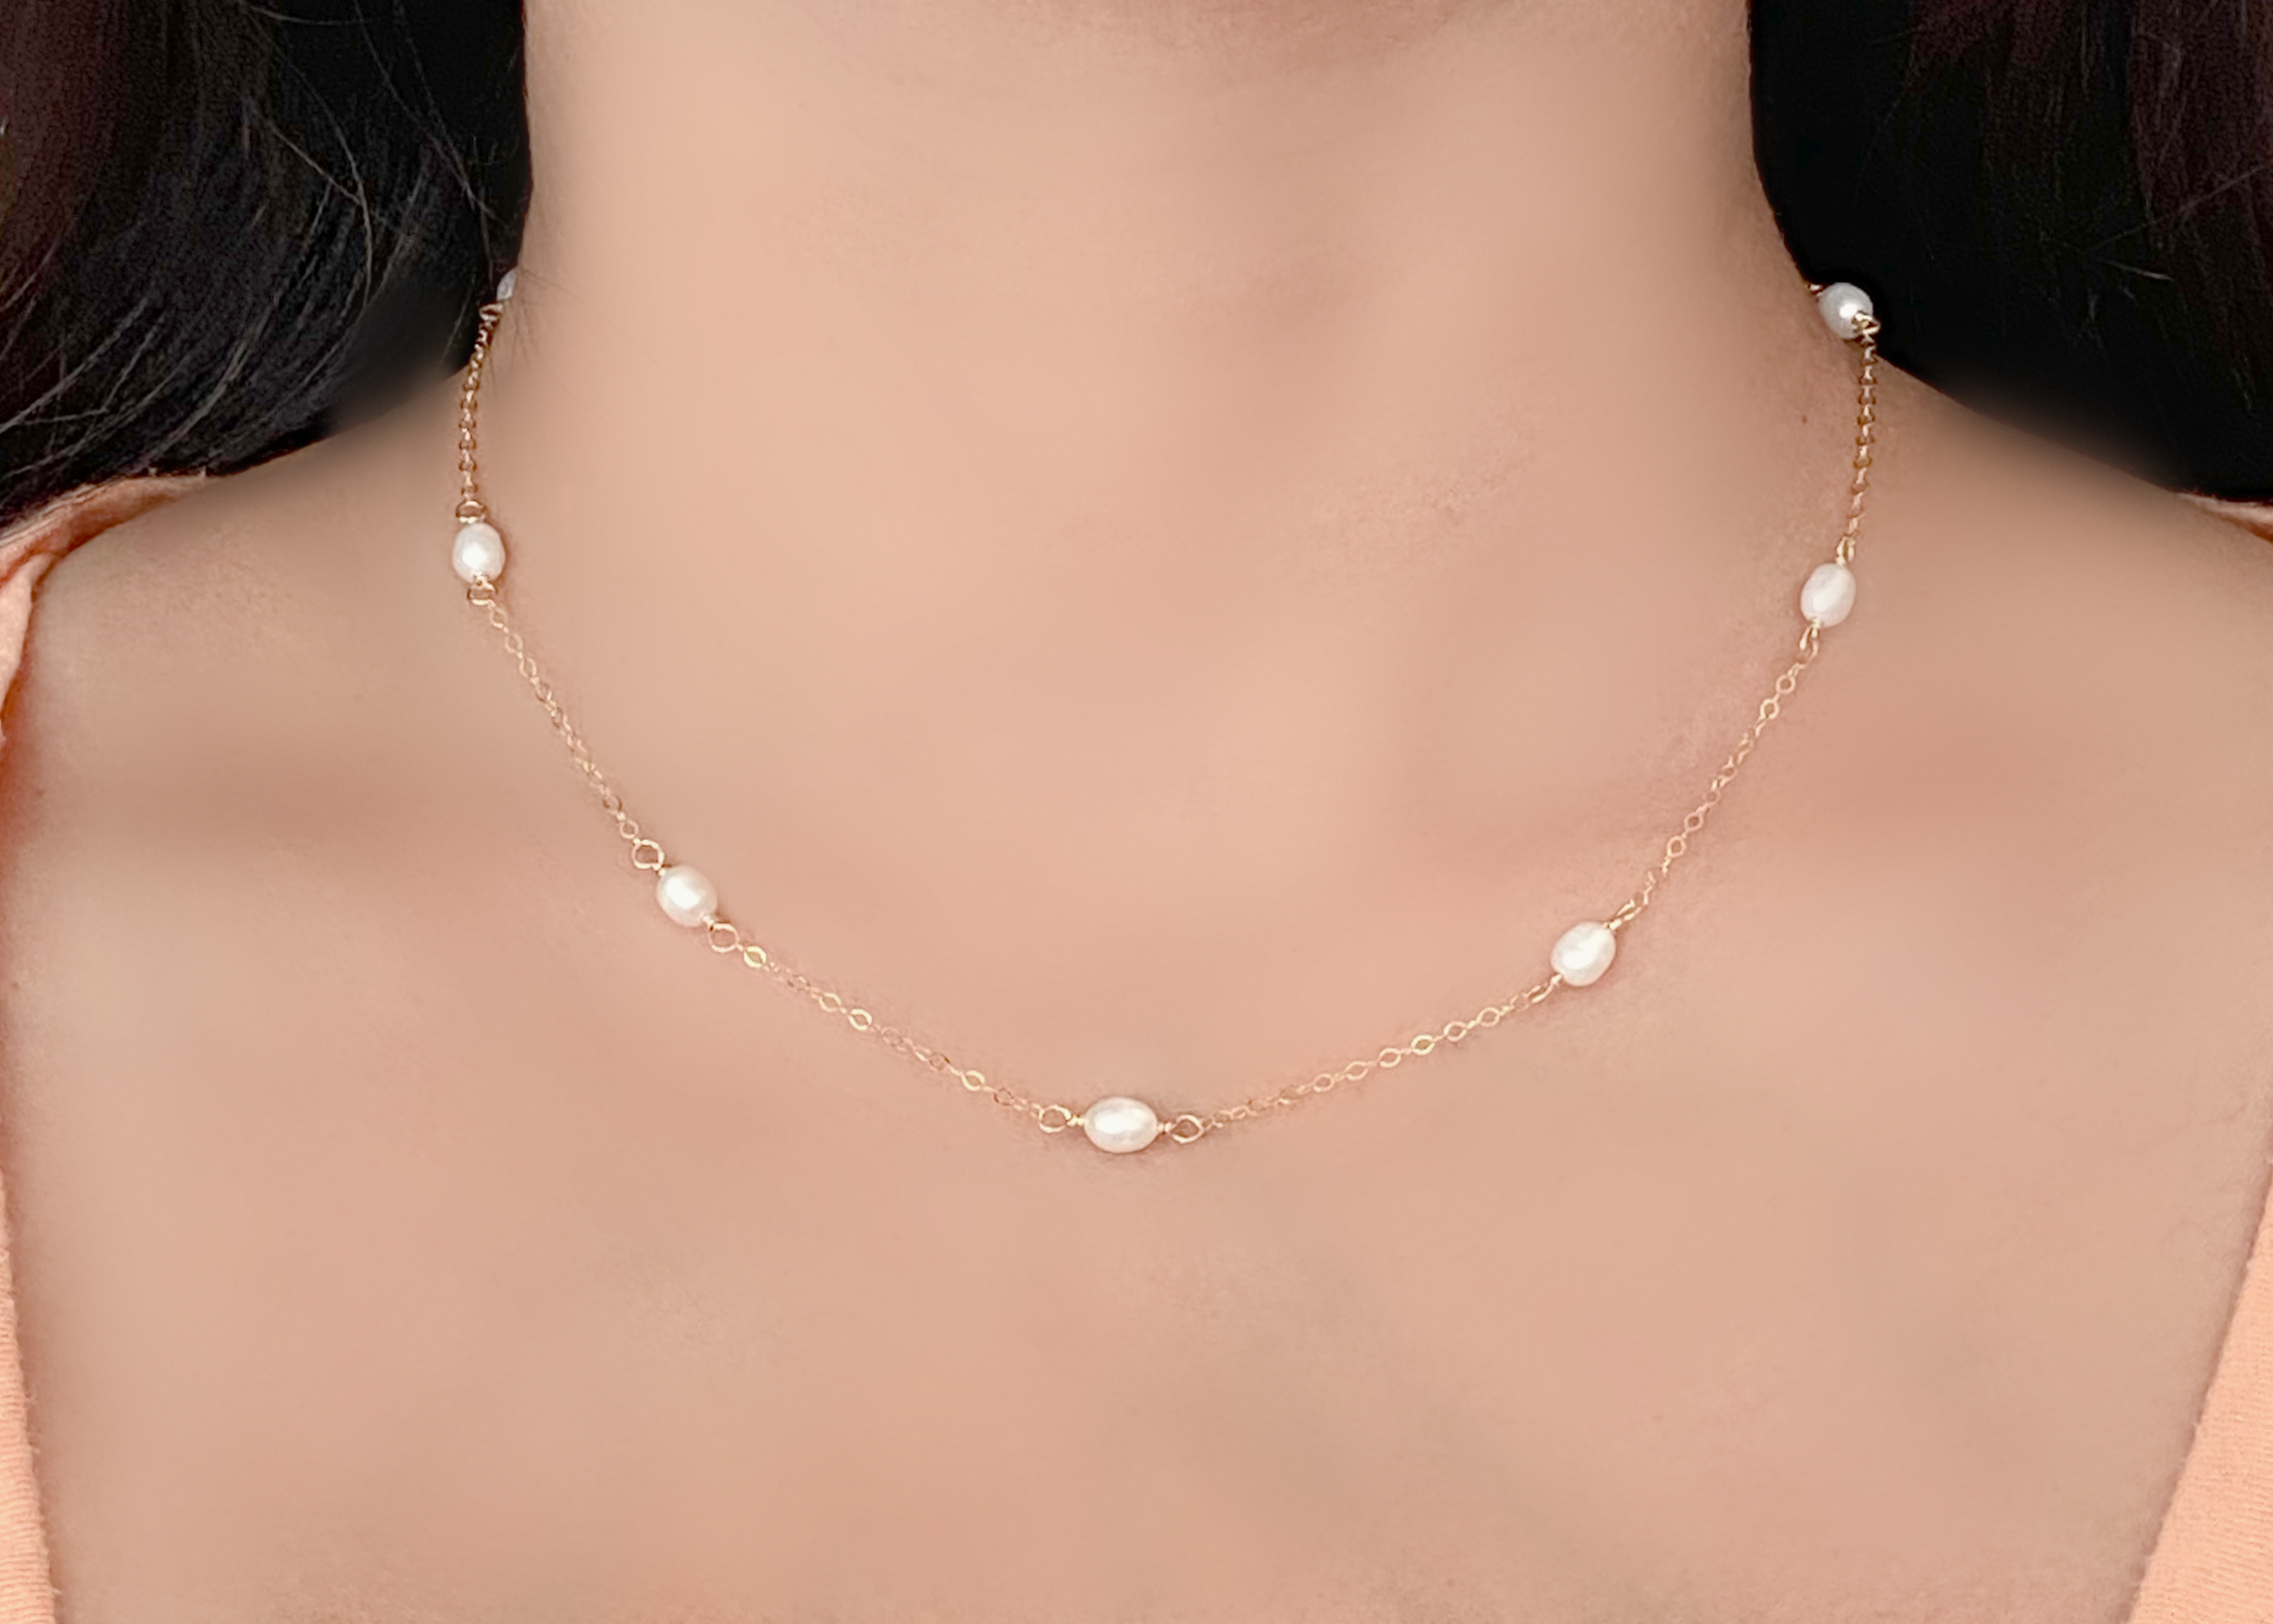 Gold Filled Fresh Water Pearl Chain Choker Necklace — Boy Cherie Jewelry:  Delicate Fashion Jewelry That Won't Break or Tarnish